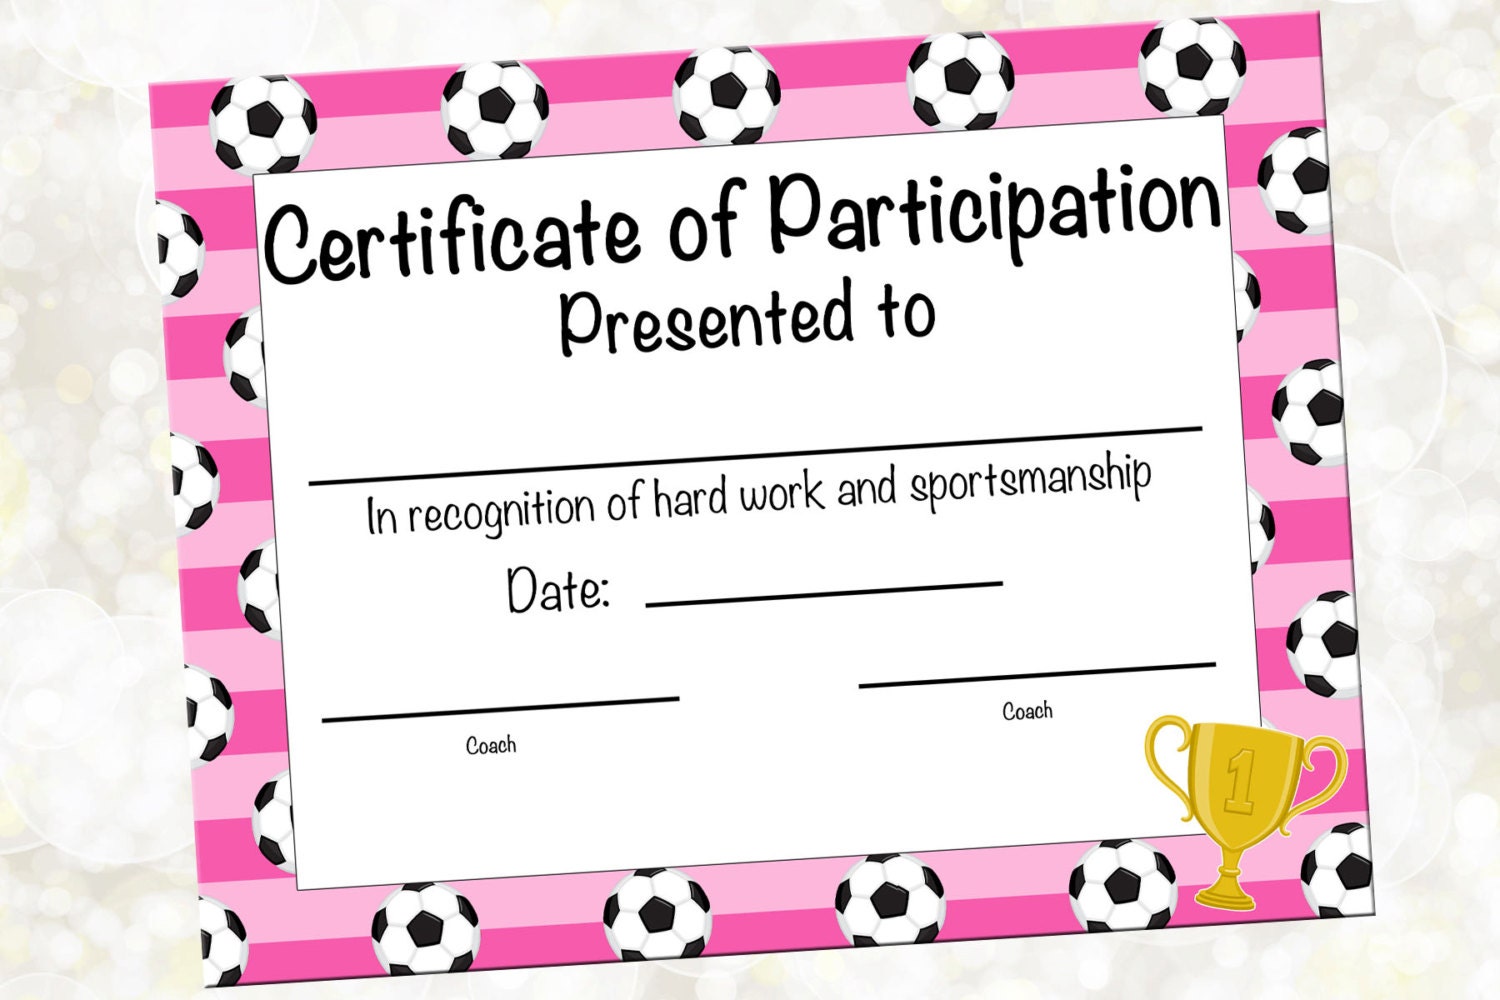 Soccer Certificate of Participation Soccer Award Print at